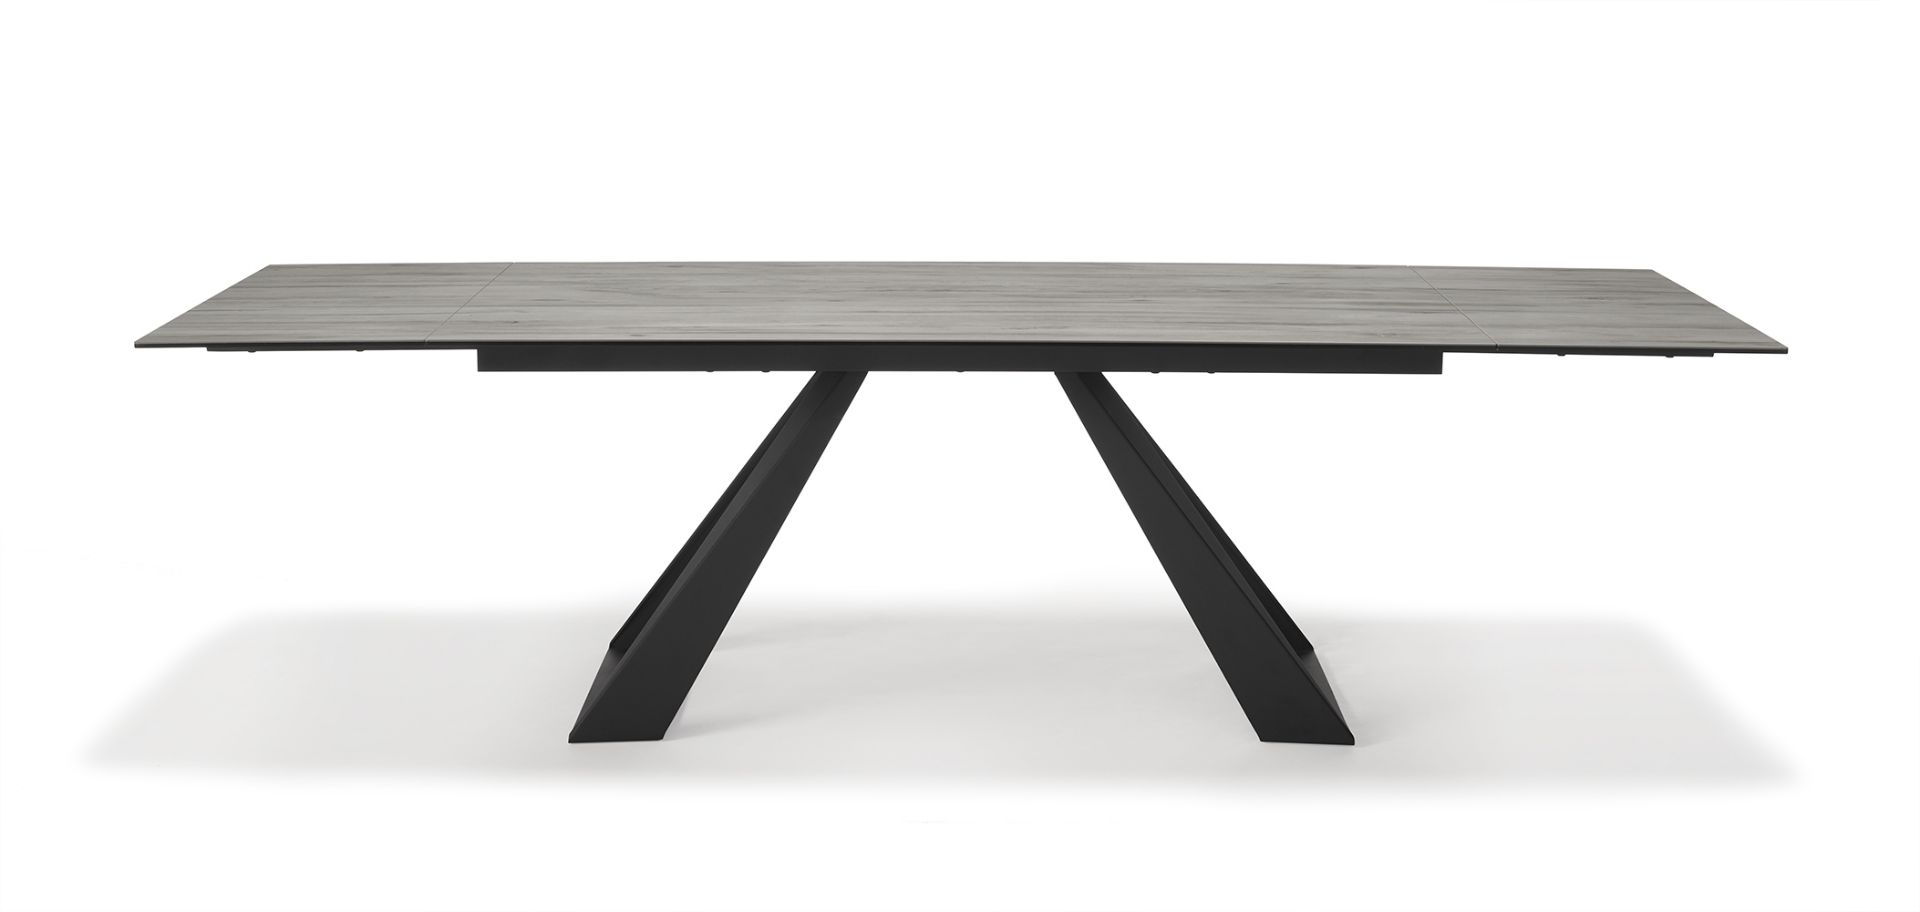 Spartan Dining Table by Kesterport The Spartan Dining Table is part of a sophisticated collection of - Image 2 of 12